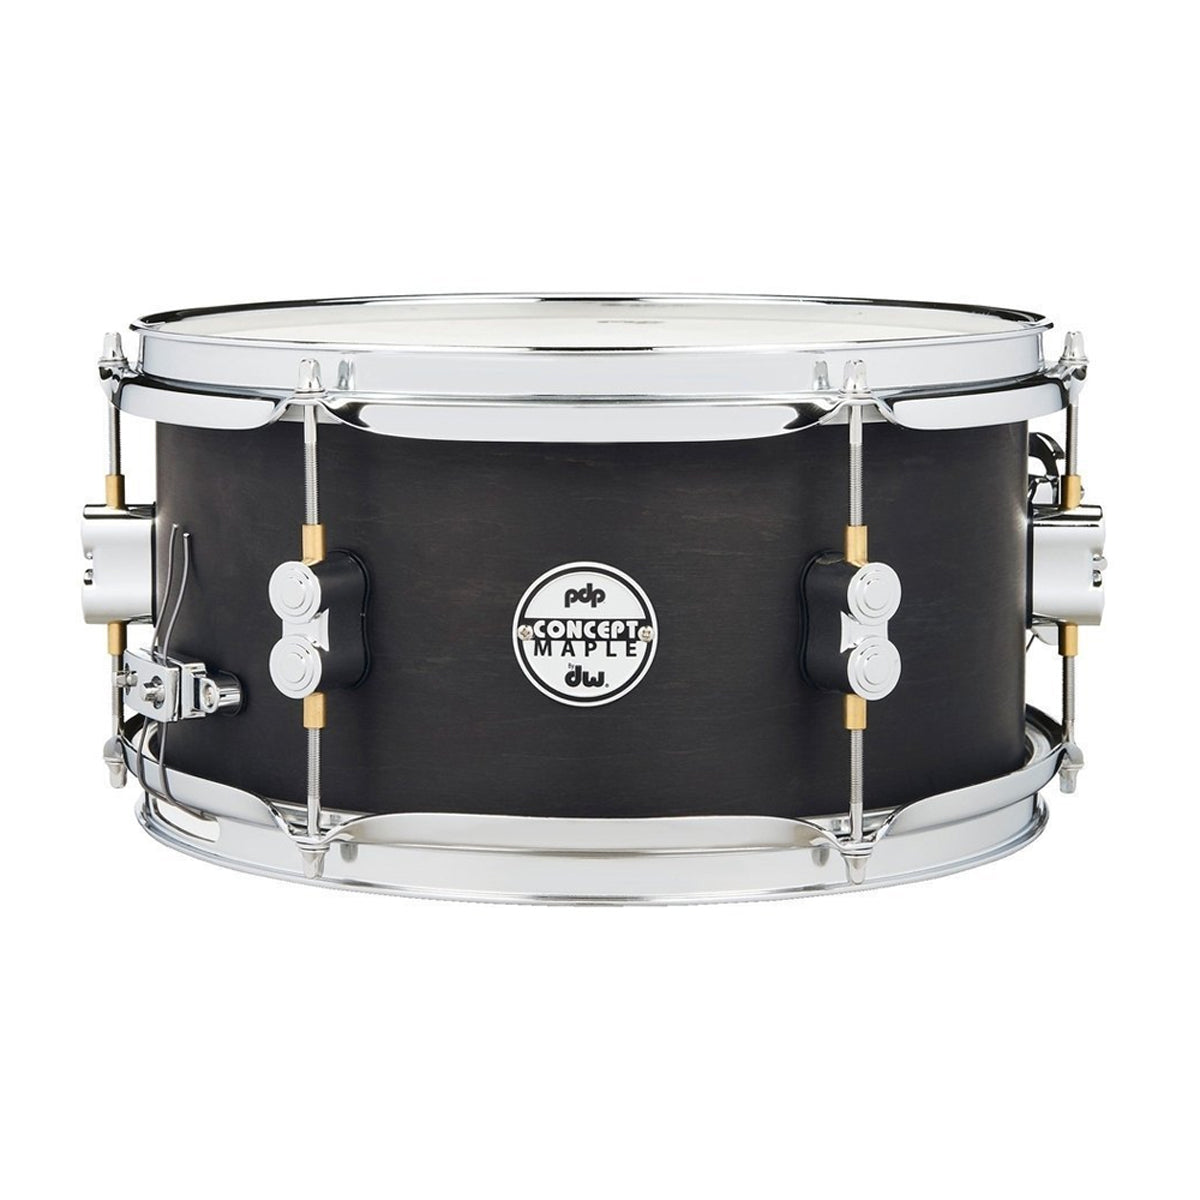 PDP by DW Concept Black Wax 12"x6" Maple Snare Drum